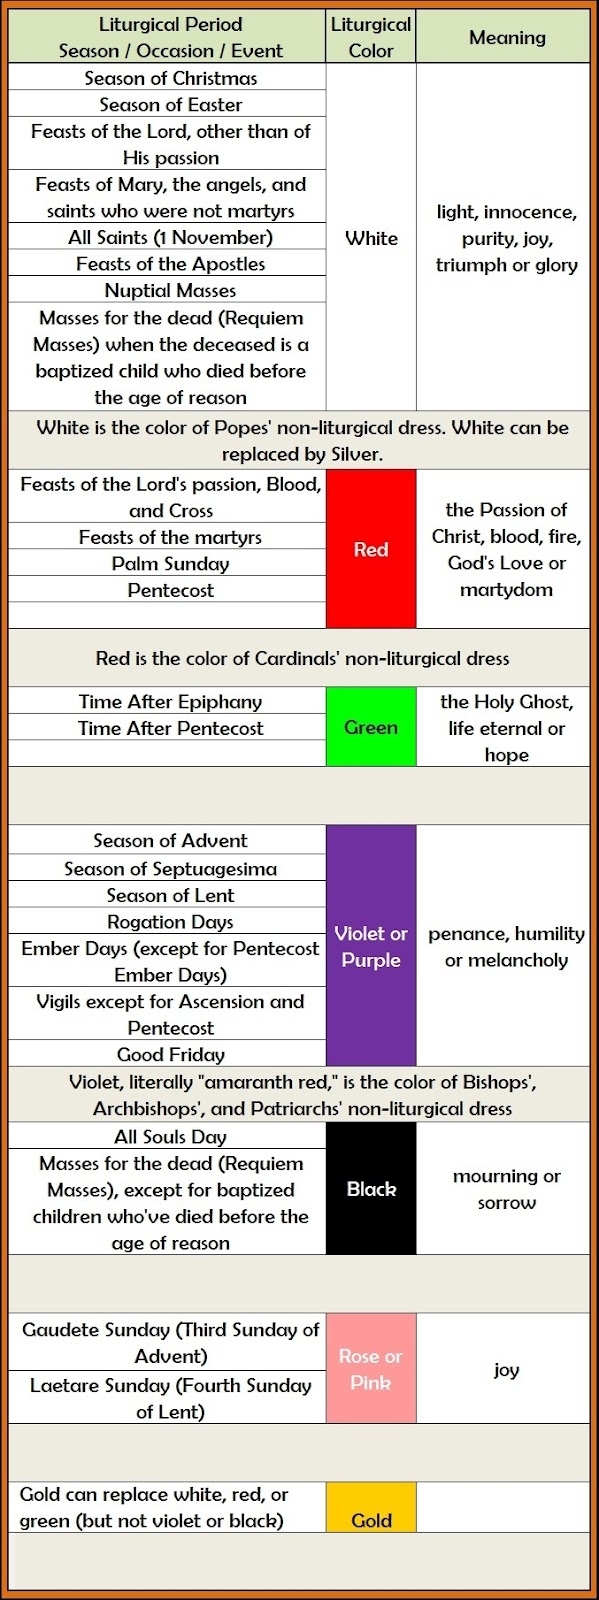 Liturgical Colors | St. Peter The Apostle Catholic Church with Liturgical Colors Catholic Calendar 2020